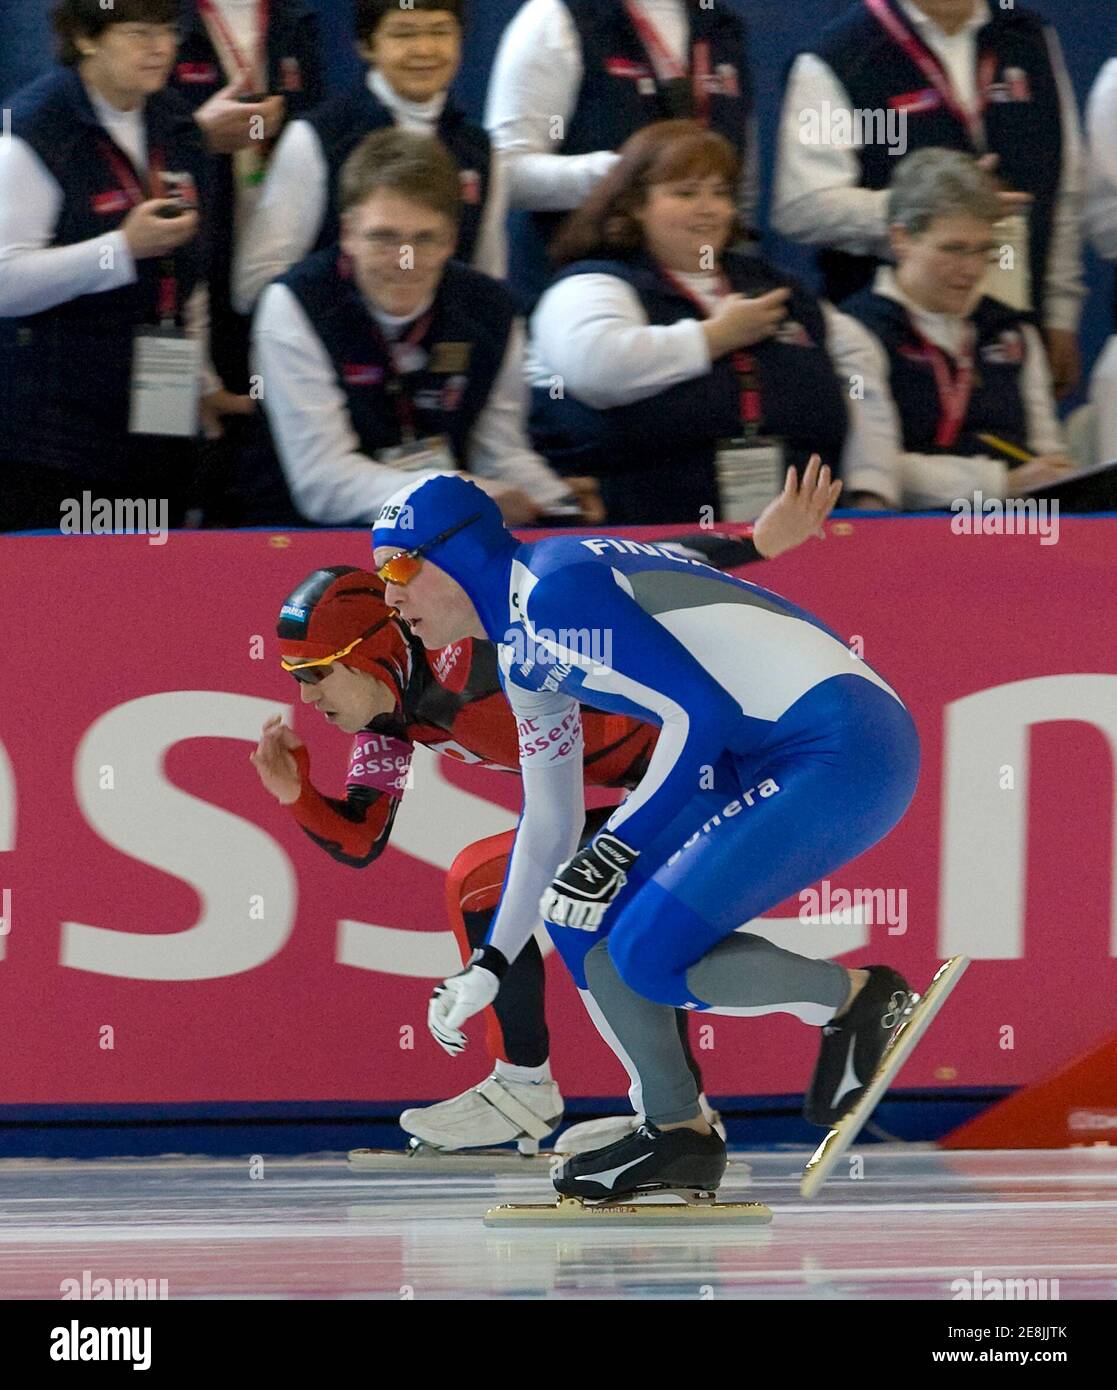 Japan's Keiichiro Nagashima (L) and Finland's Mika Poutala race head to head in the men's 500-metre during the World Cup Single Distance Speed Skating Championships in Richmond, British Columbia March 15, 2009.       REUTERS/Andy Clark     (CANADA SPORT SPEED SKATING) Stock Photo